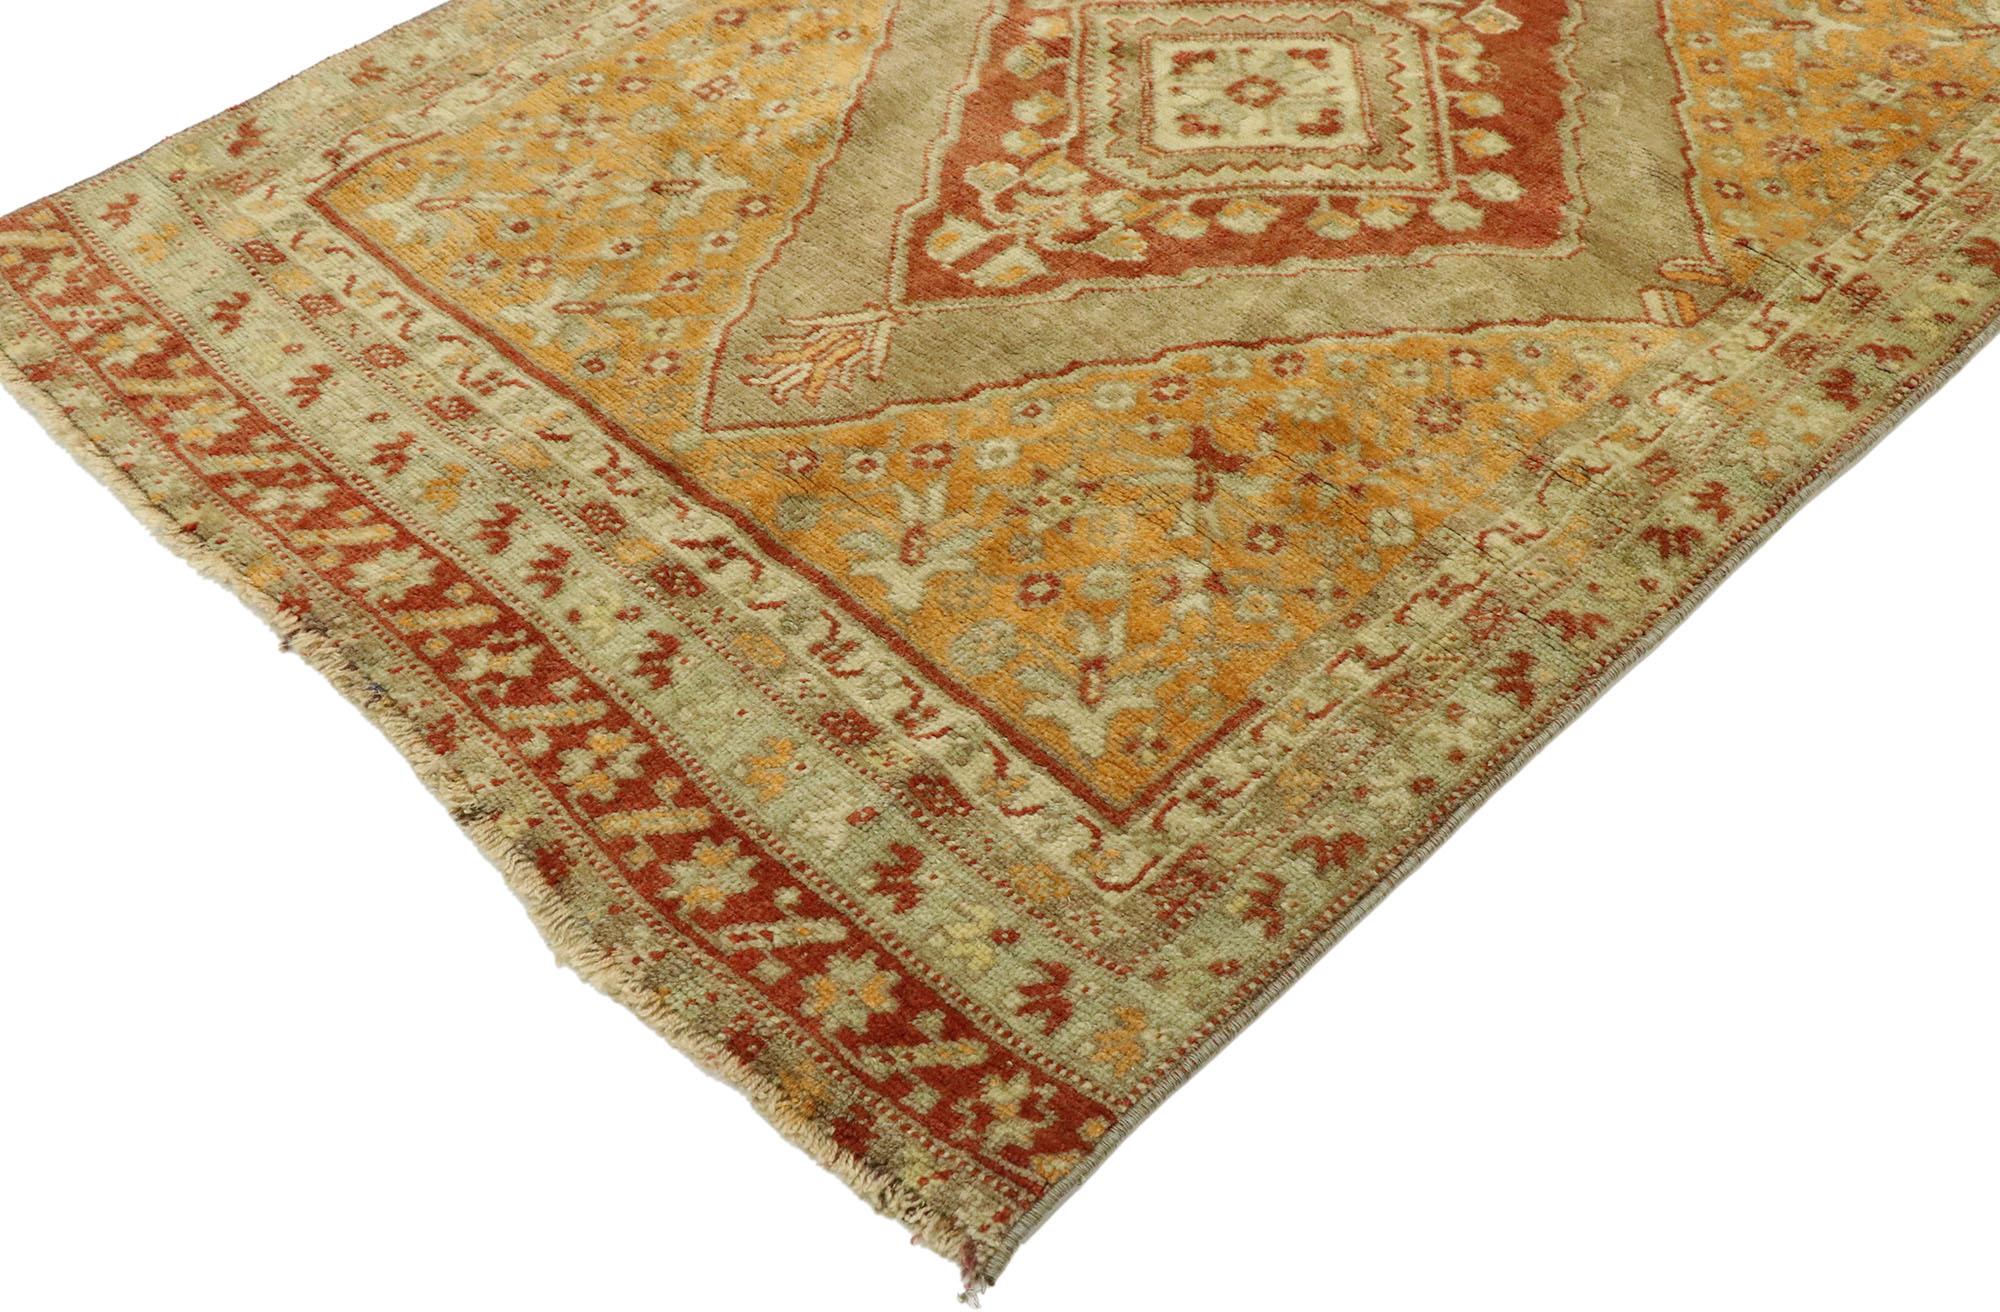 53099 vintage Turkish Oushak runner with warm Arts & Crafts style. Imbued with architectural elements of naturalistic forms in earth-tone colors, this hand knotted wool vintage Turkish Oushak runner beautifully embodies warm Arts & Crafts Style. The